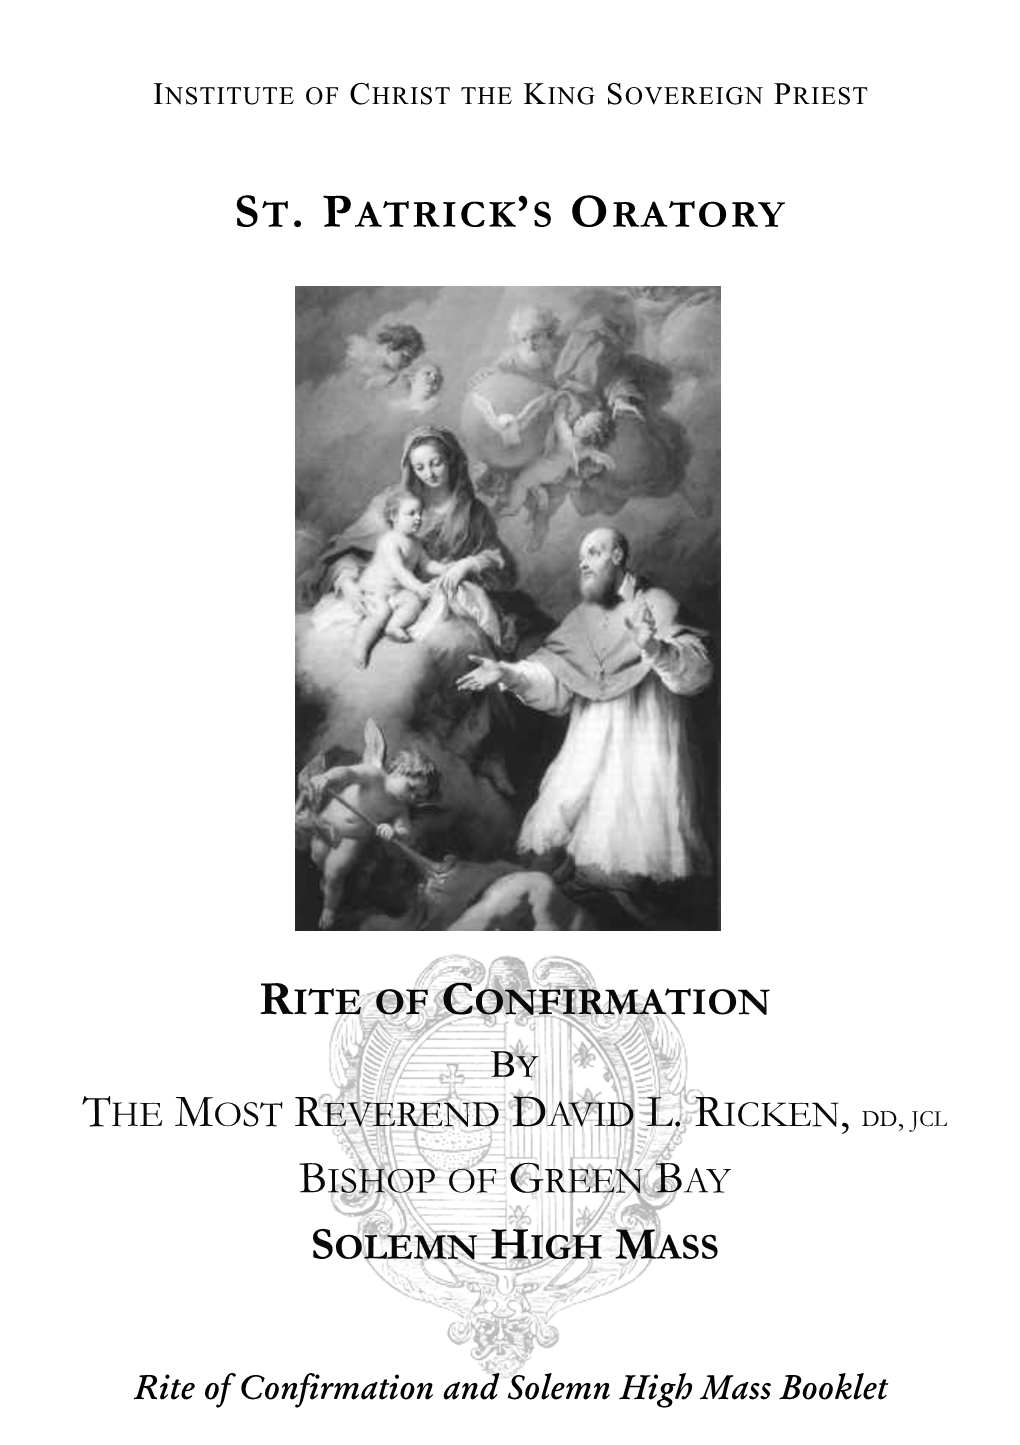 Rite of Confirmation by St. Patrick's Oratory